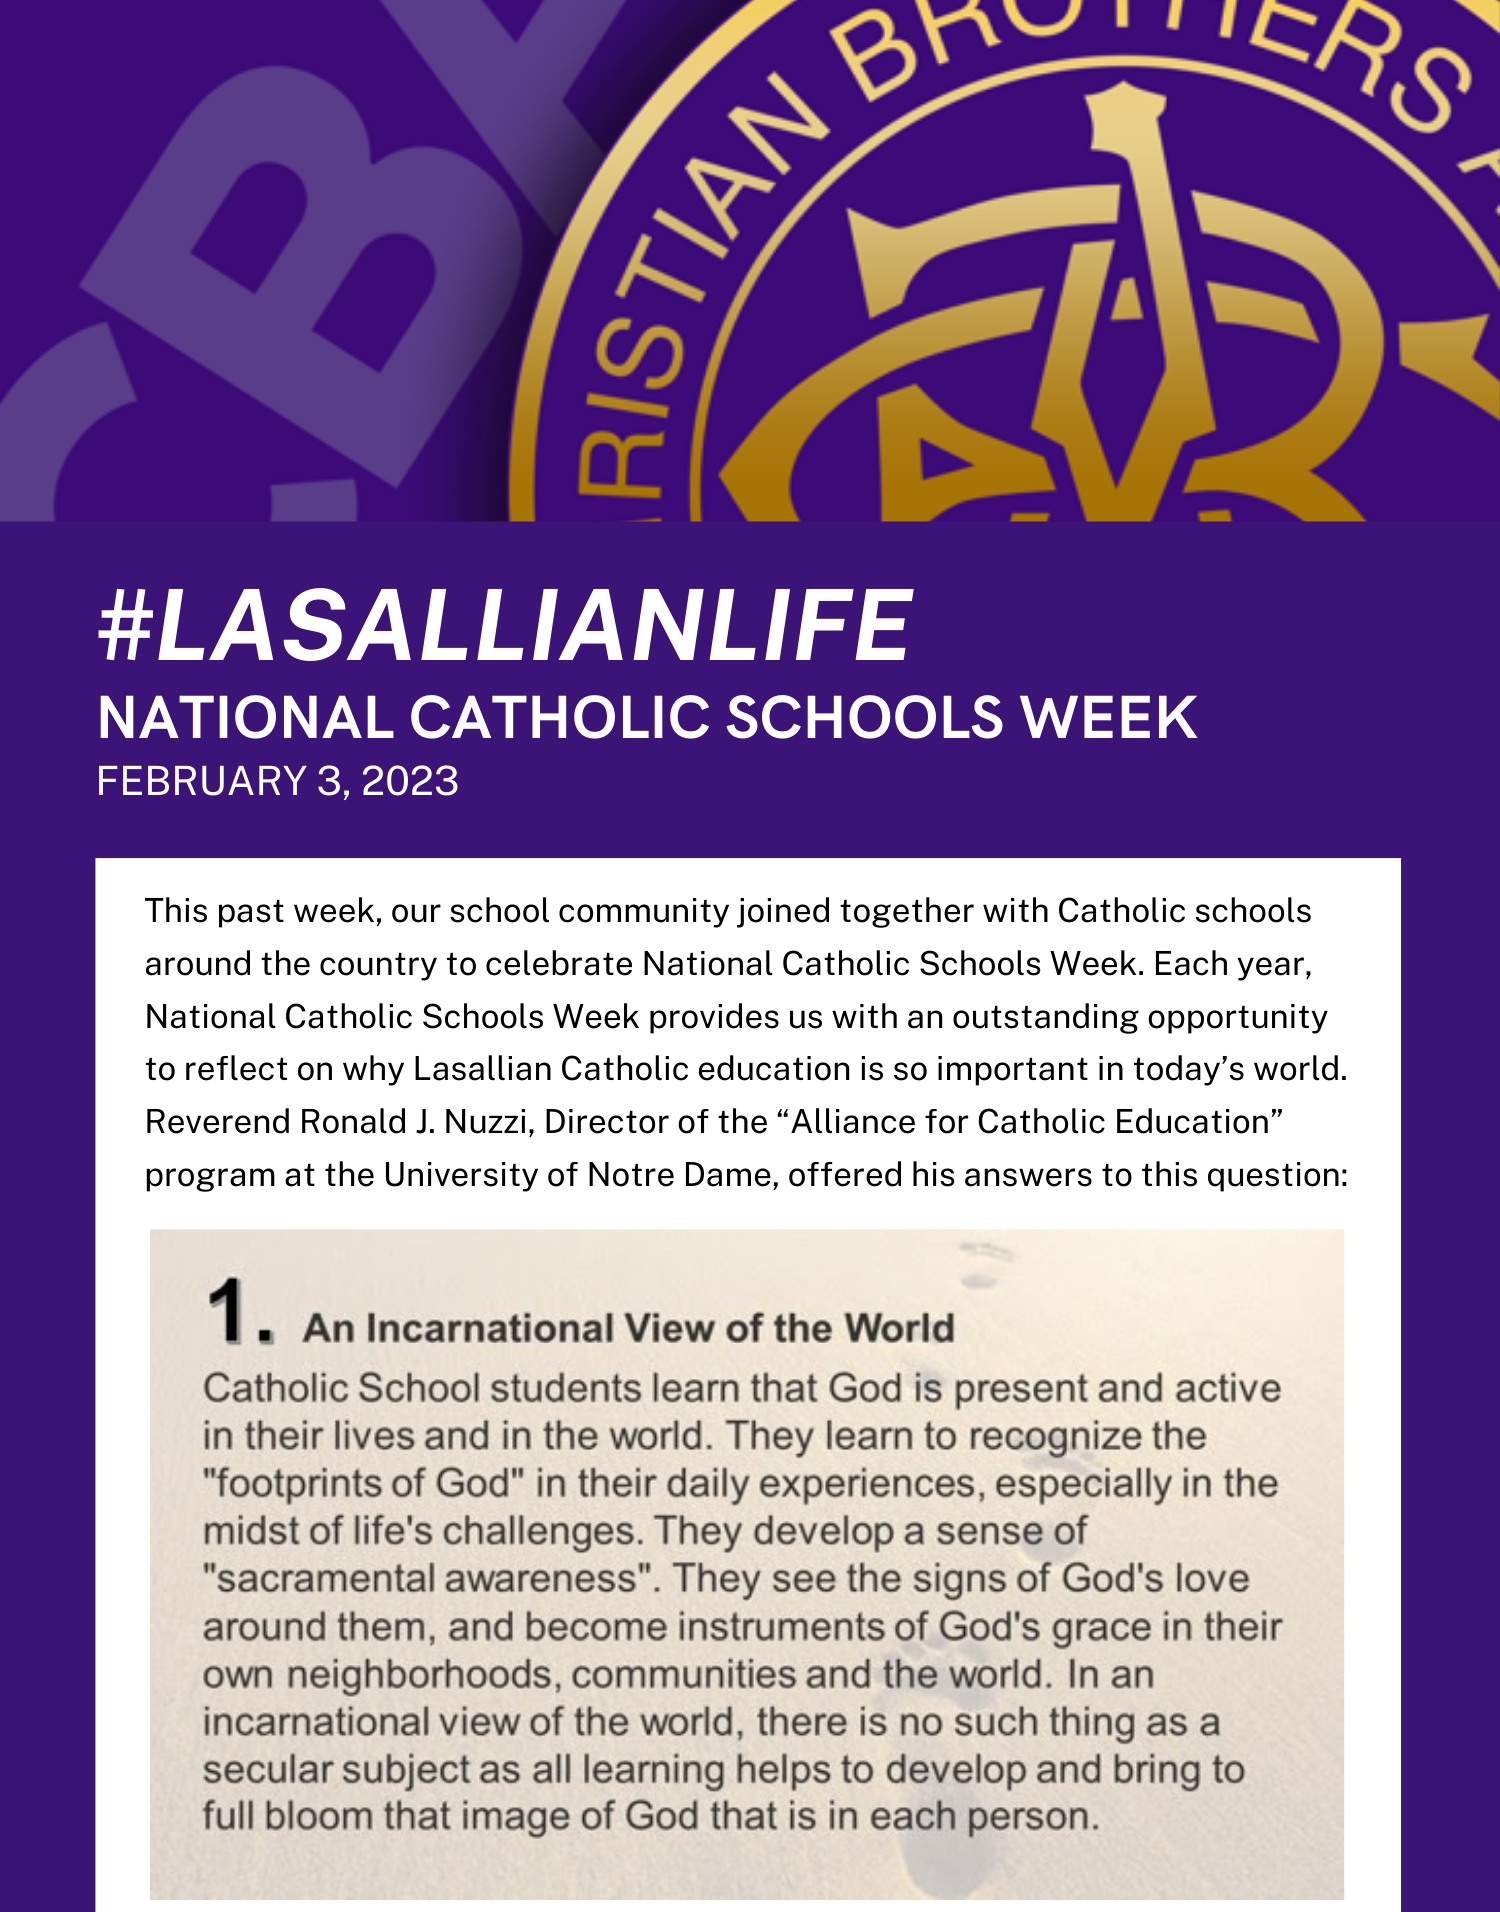 Christian Brothers Academy's President Matthew Keough reflects on why Lasallian Catholic Education is so important. Reason #1 An Incarnational View of the World Catholic School students learn that God is present and active in their lives and in the world. They learn to recognize the "footprints of God" in their daily experiences, especially in the midst of life's challenges. They develop a sense of "sacramental awareness". They see the signs of God's love around them, and become instruments of God's grace in their own neighborhoods, communities and the world. In an incarnational view of the world, there is no such thing as a secular subject as all learning helps to develop and bring to full bloom that image of God that is in each person.